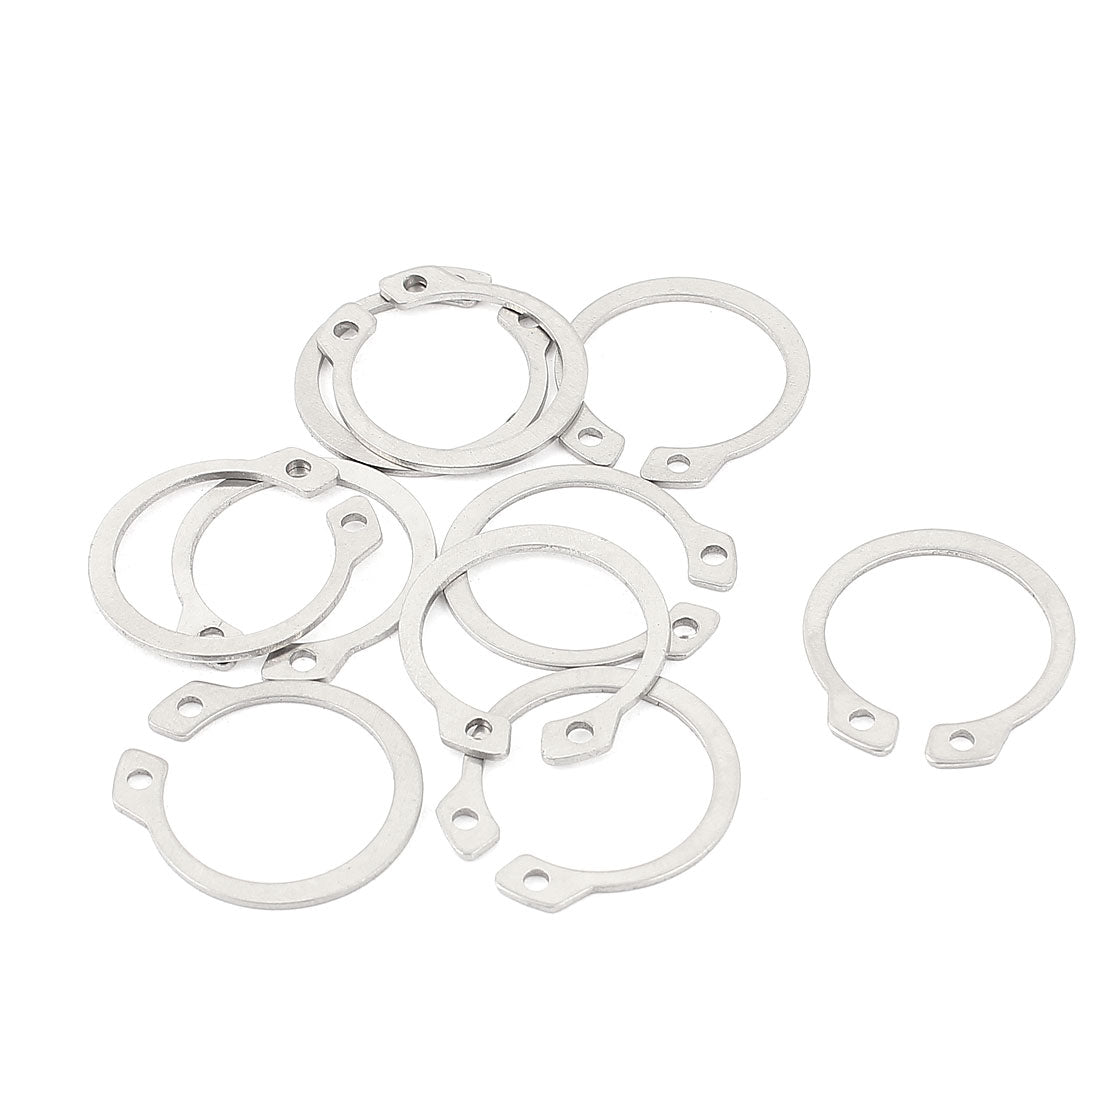 uxcell Uxcell 10pcs 304 Stainless Steel External Circlip Retaining Shaft Snap Rings 21mm